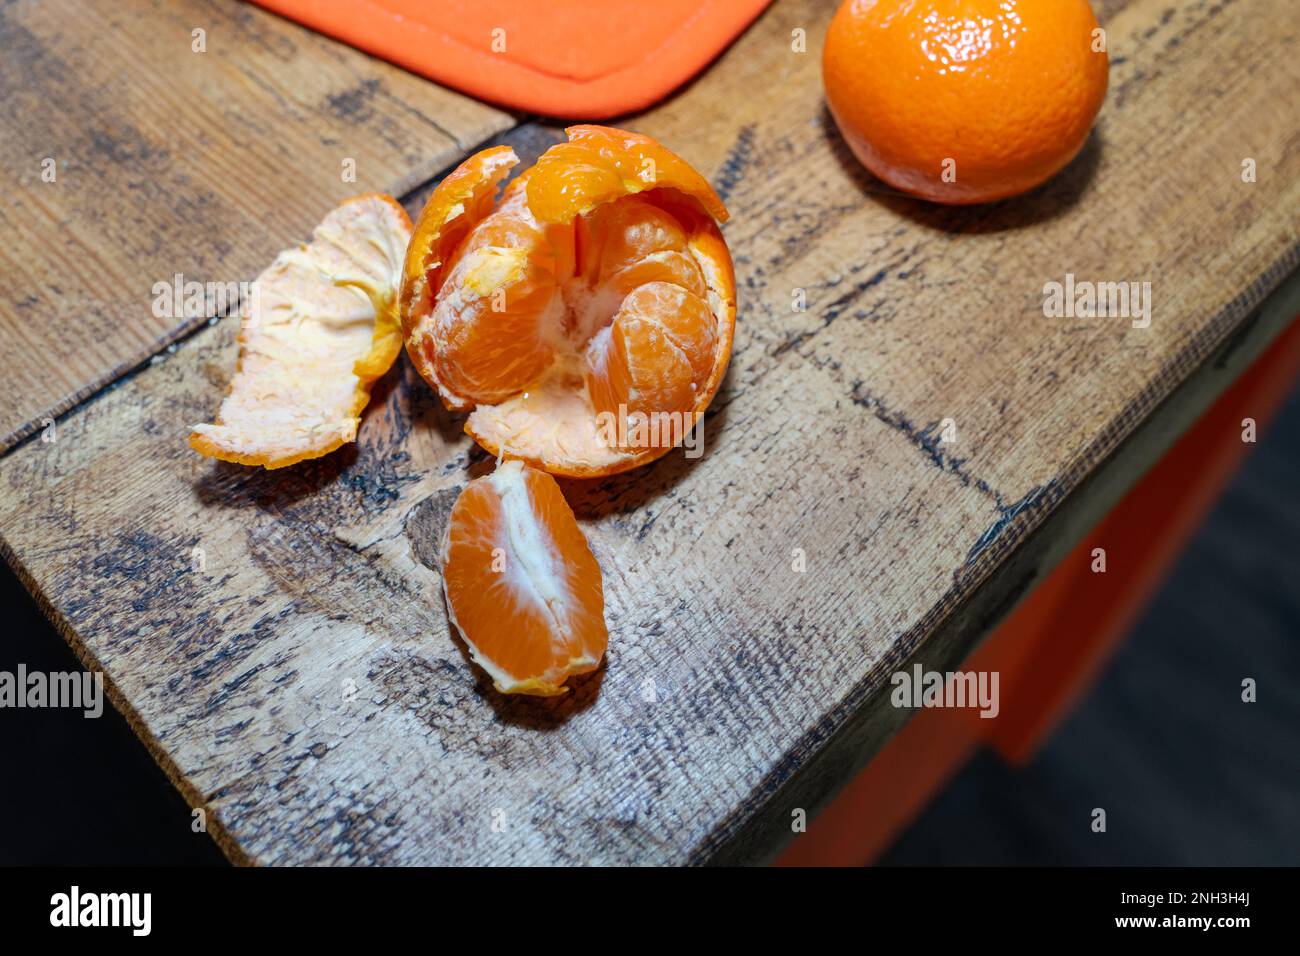 Two organic satsumas. one opened, on the edge of a rough wooden butcher's block with orange sides. Concept of healthy eating lifestyle kitchen. Stock Photo